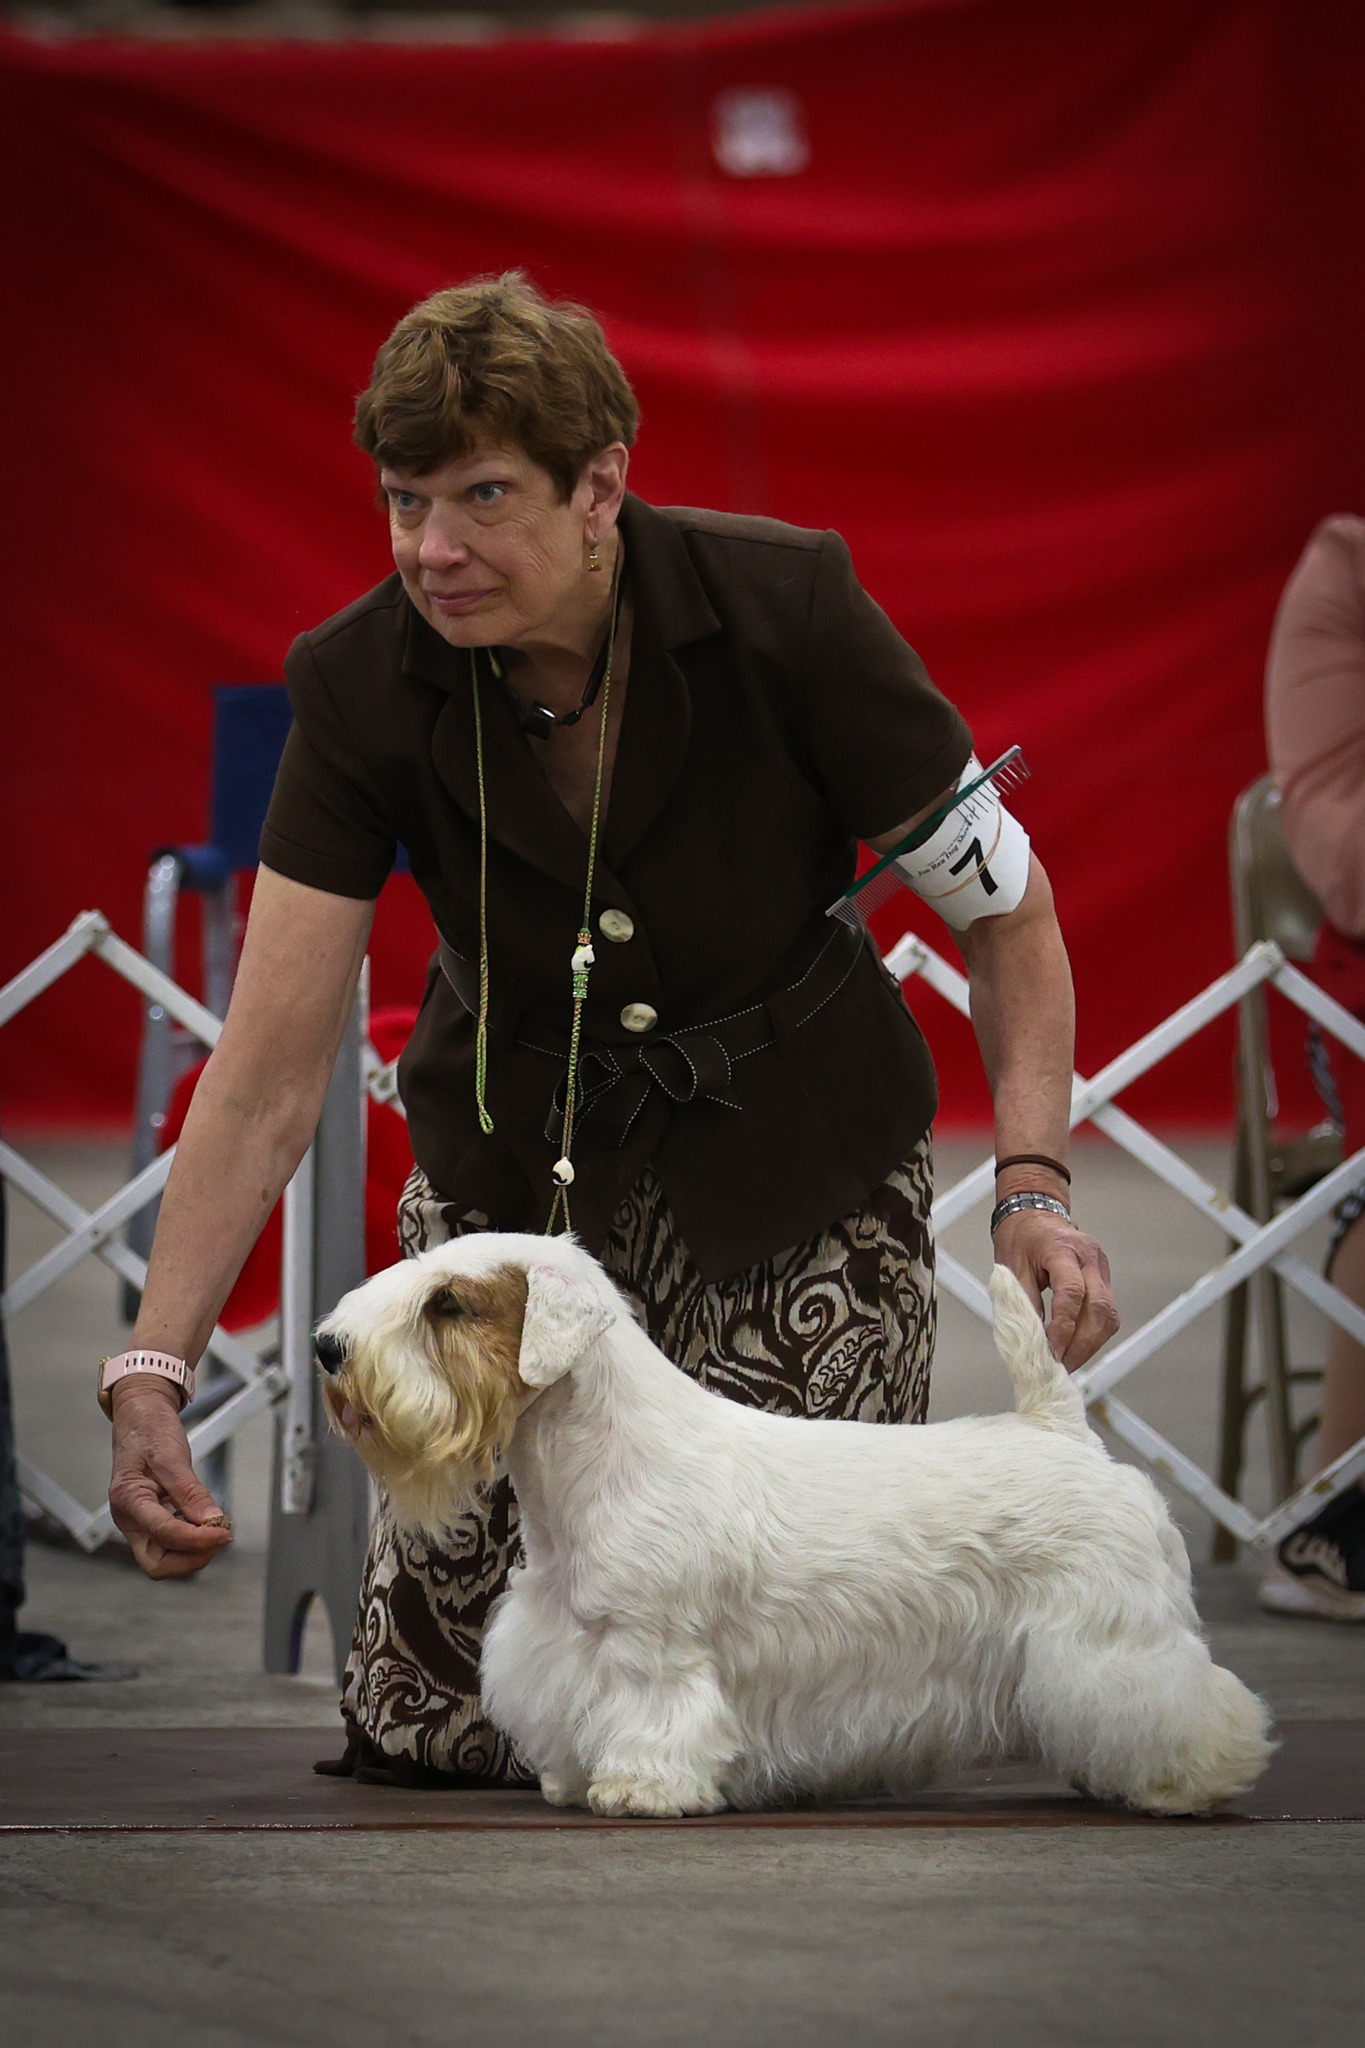 Sealyham Terrier during a dog show in the current year